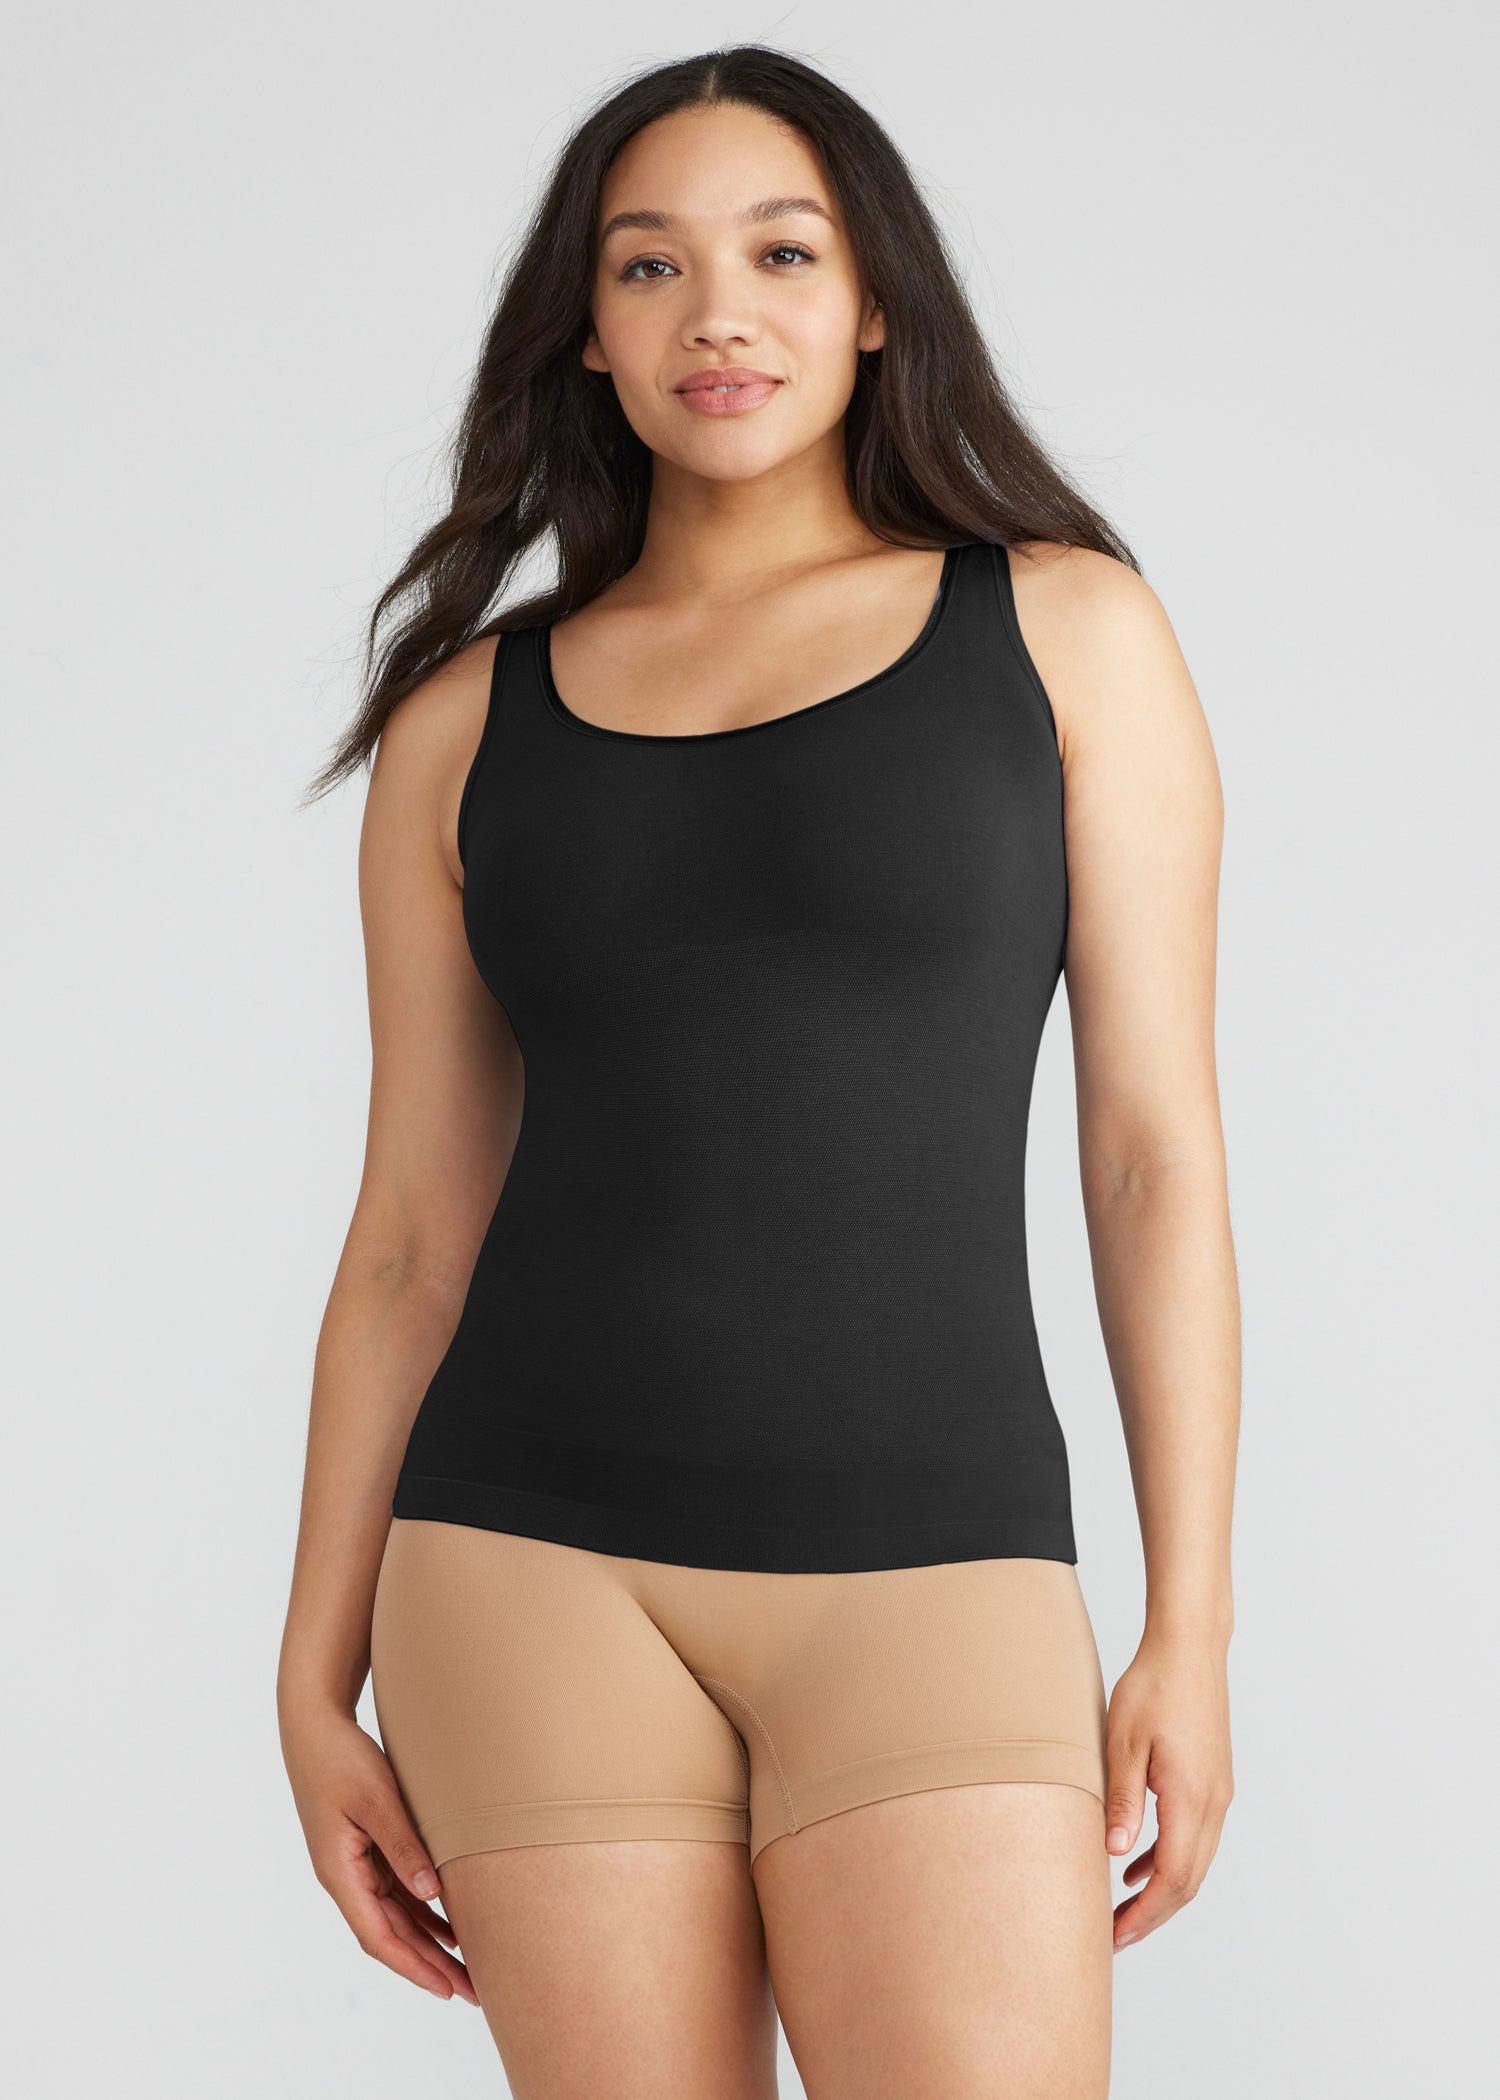 Introducing The 6-in-1 Shaping Tank From Yummie: The Newest Patent Pending  Design On The Market